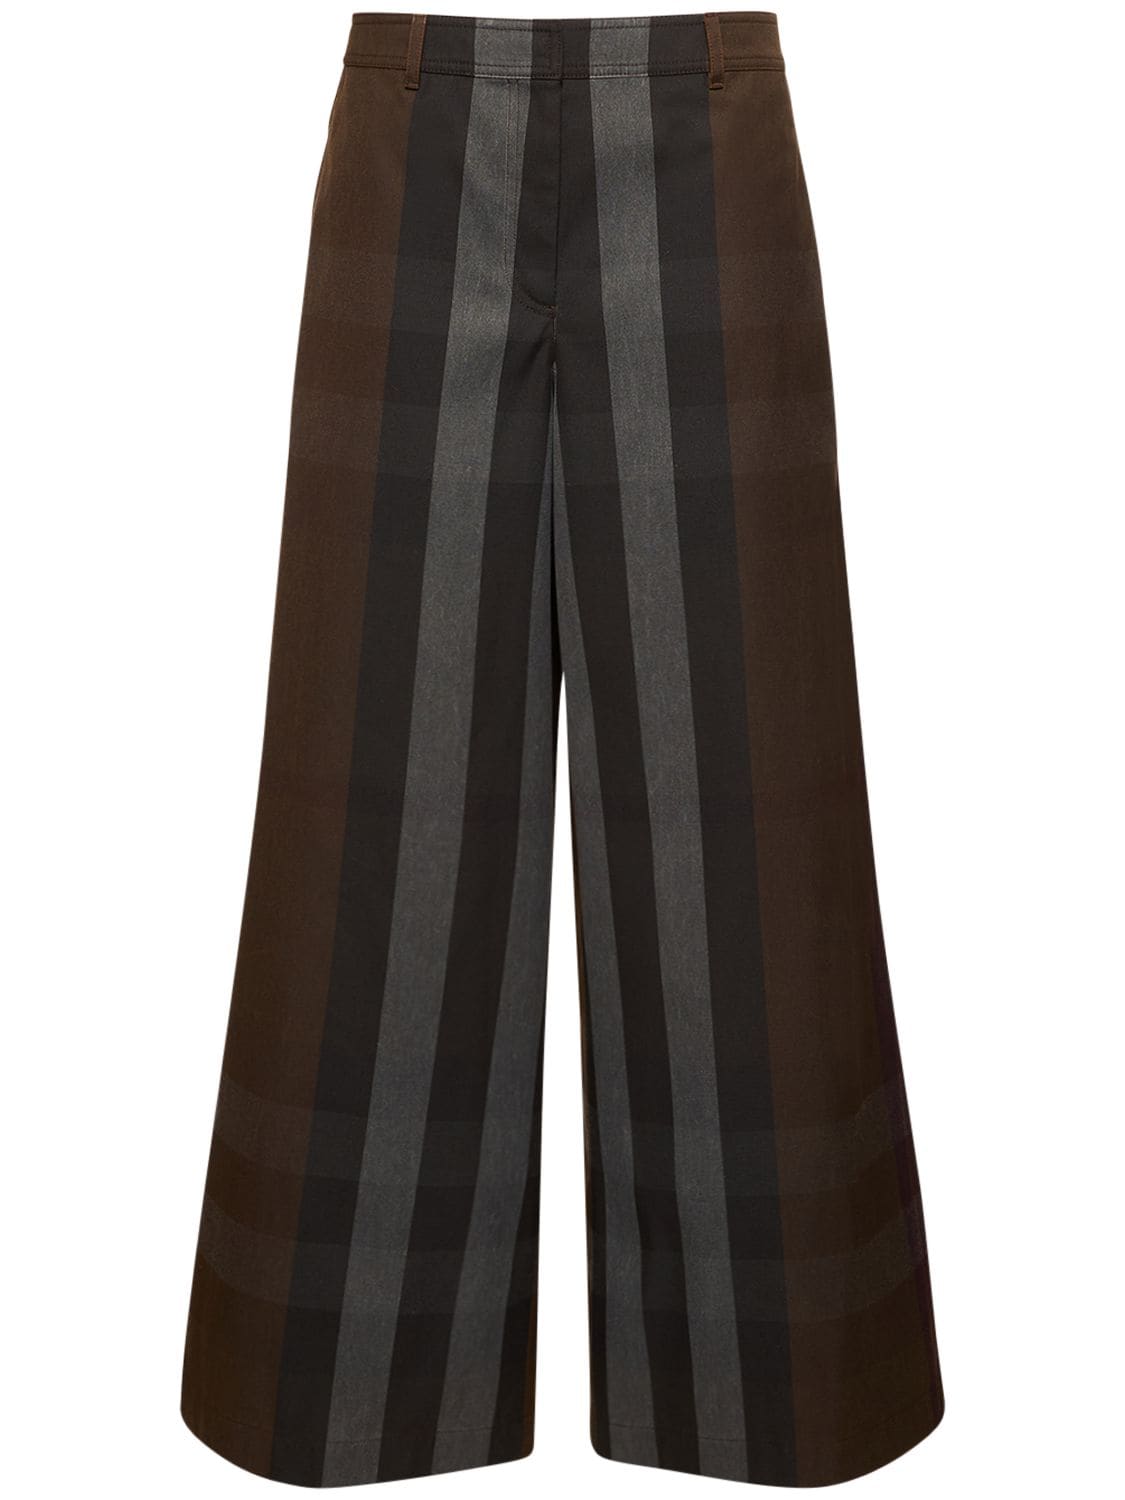 BURBERRY WAXED CHECK PRINT WIDE PANTS W/SIDE FLAP